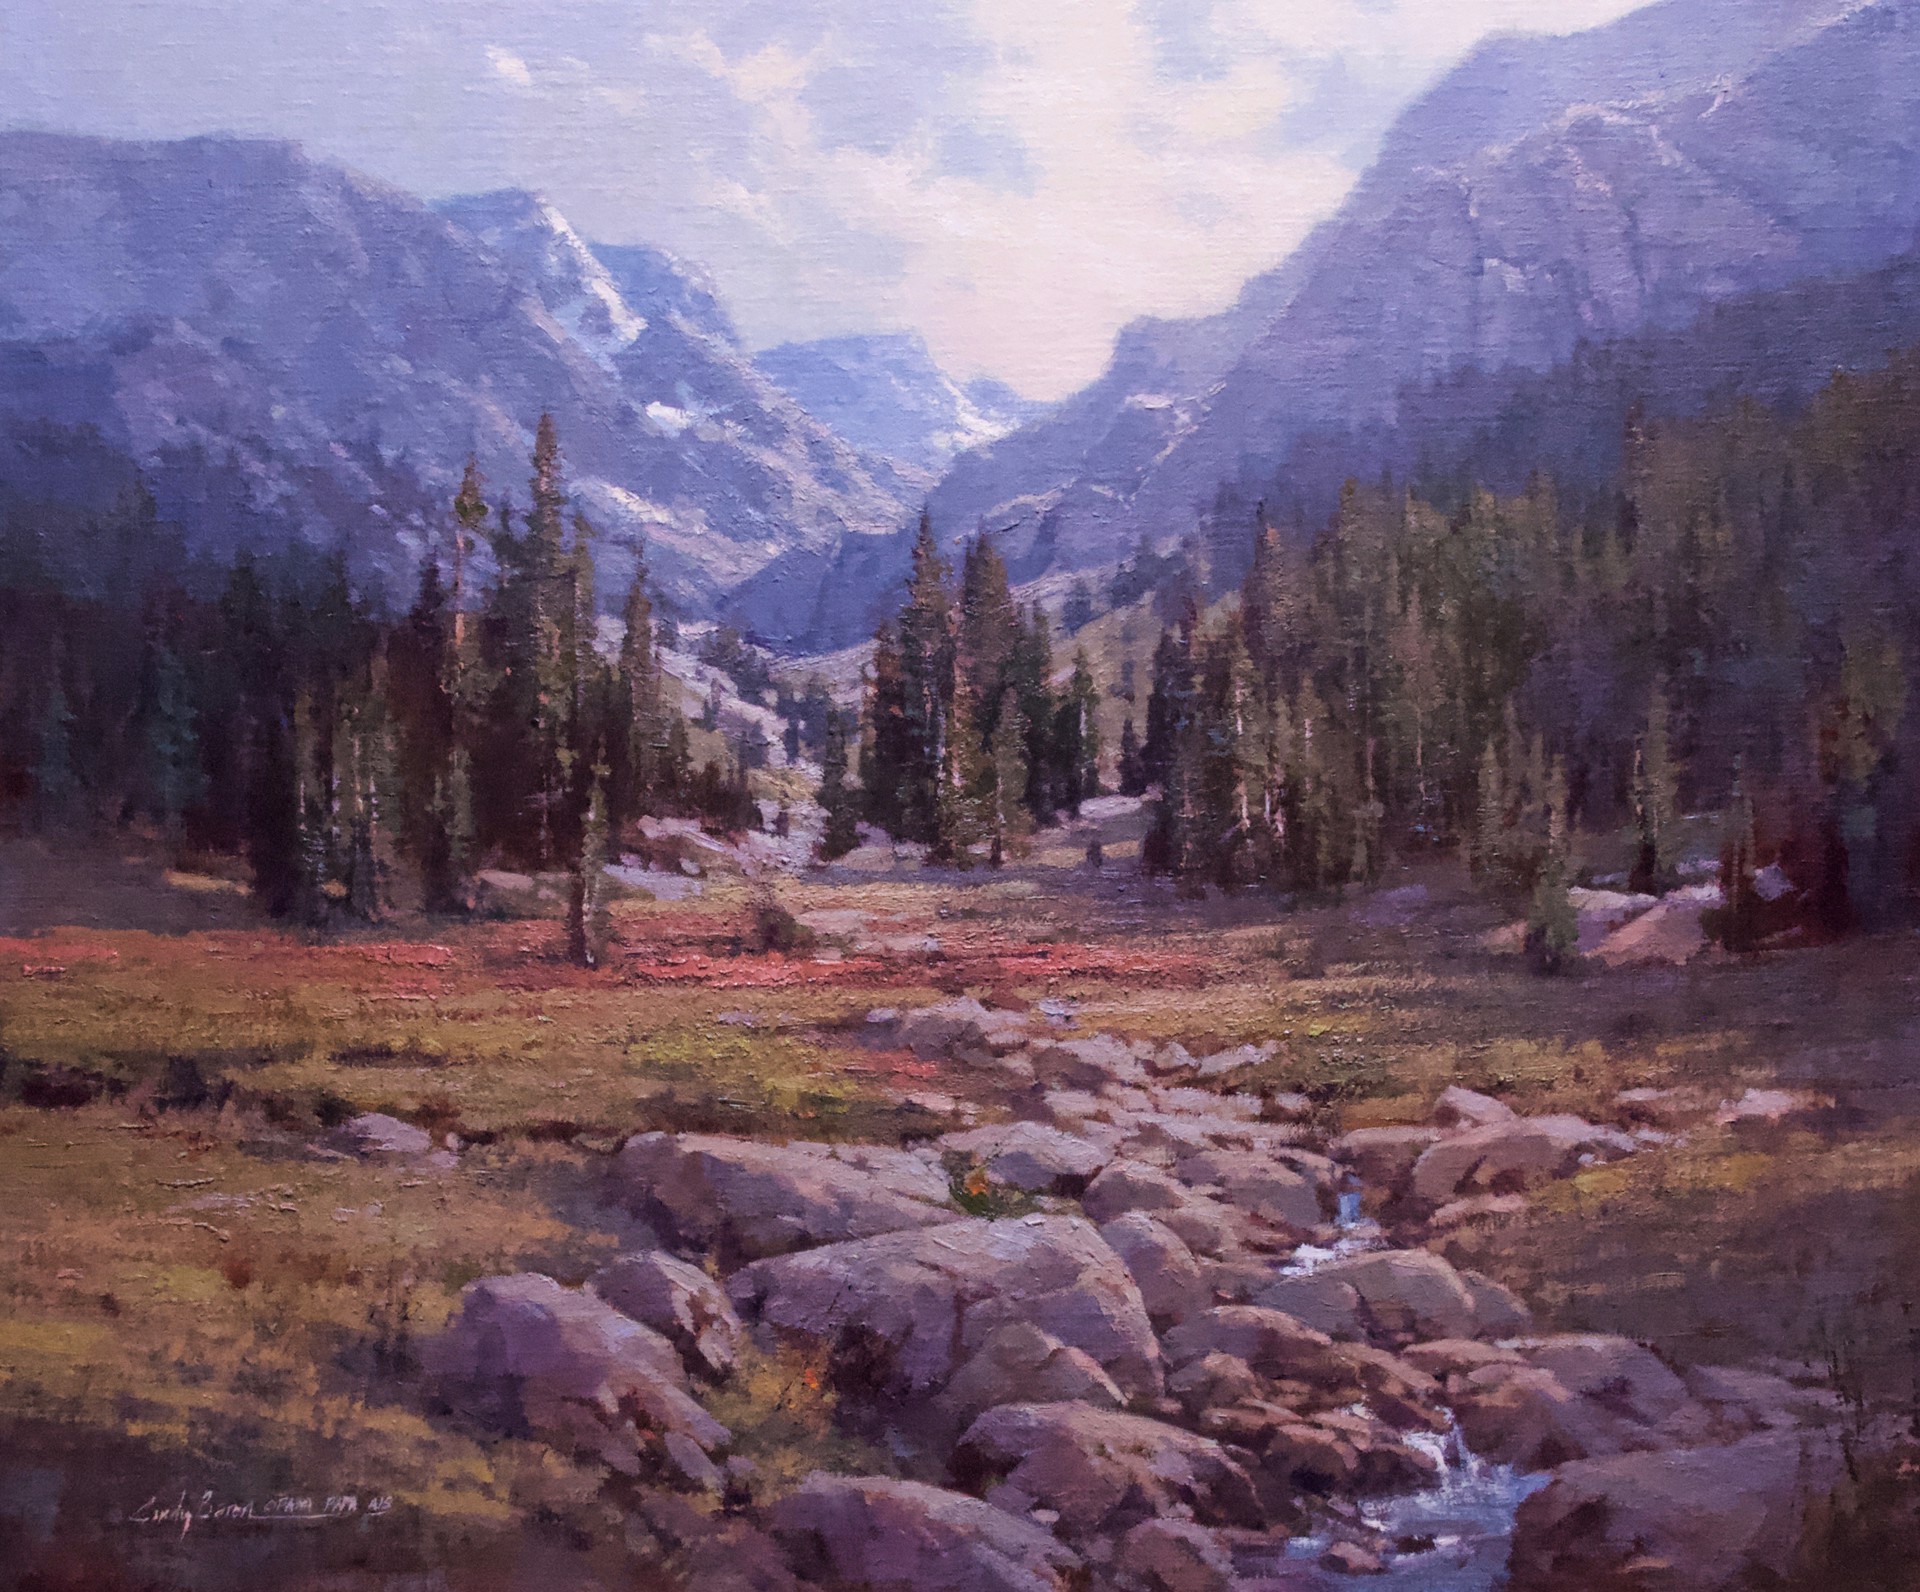 Fall in the High Sierras by Cindy Baron